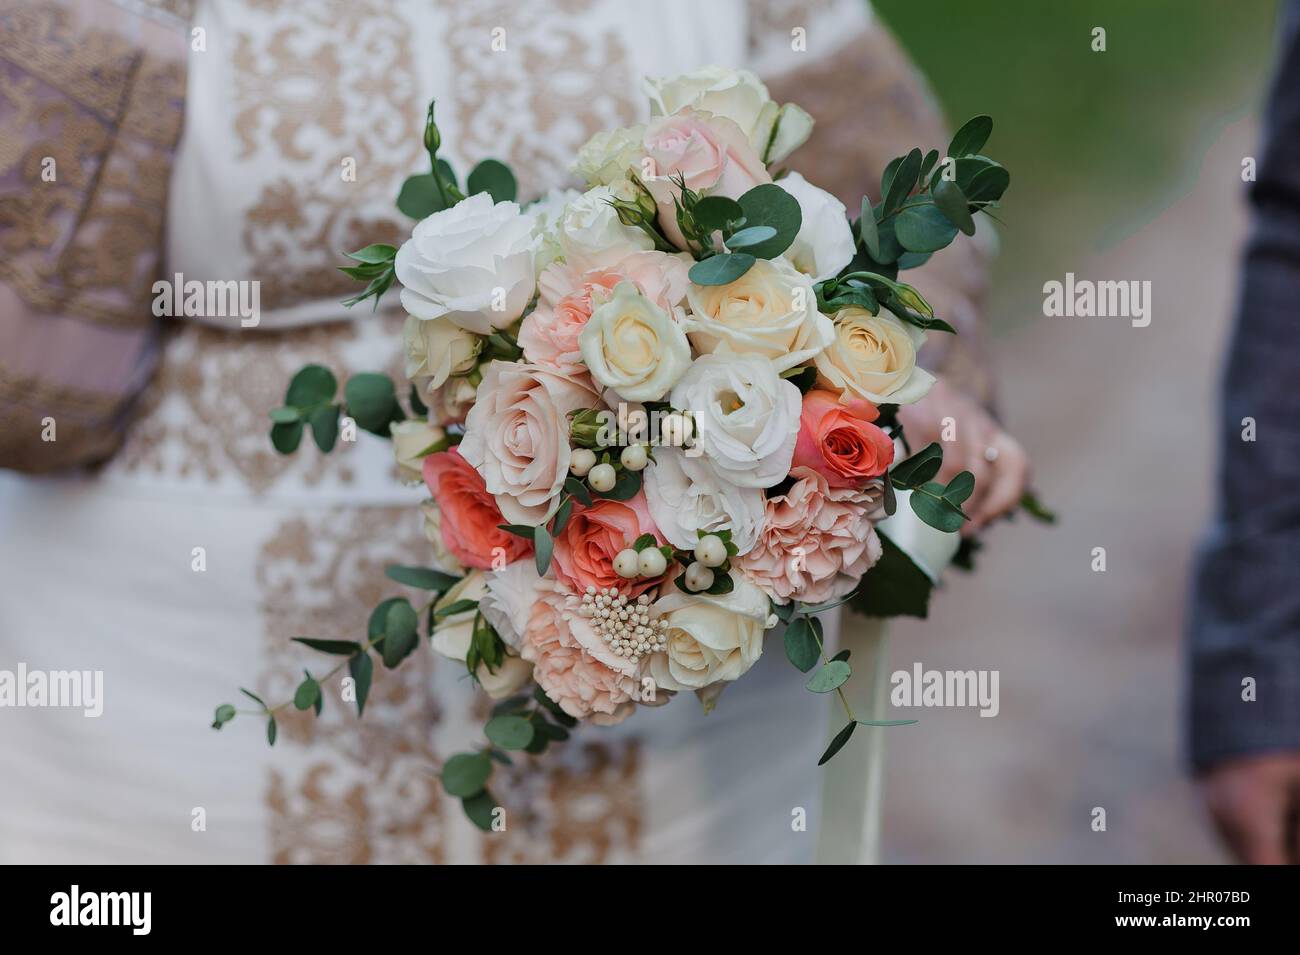 Bouquet of flowers in the bride's hand. Bridal bouquet Stock Photo